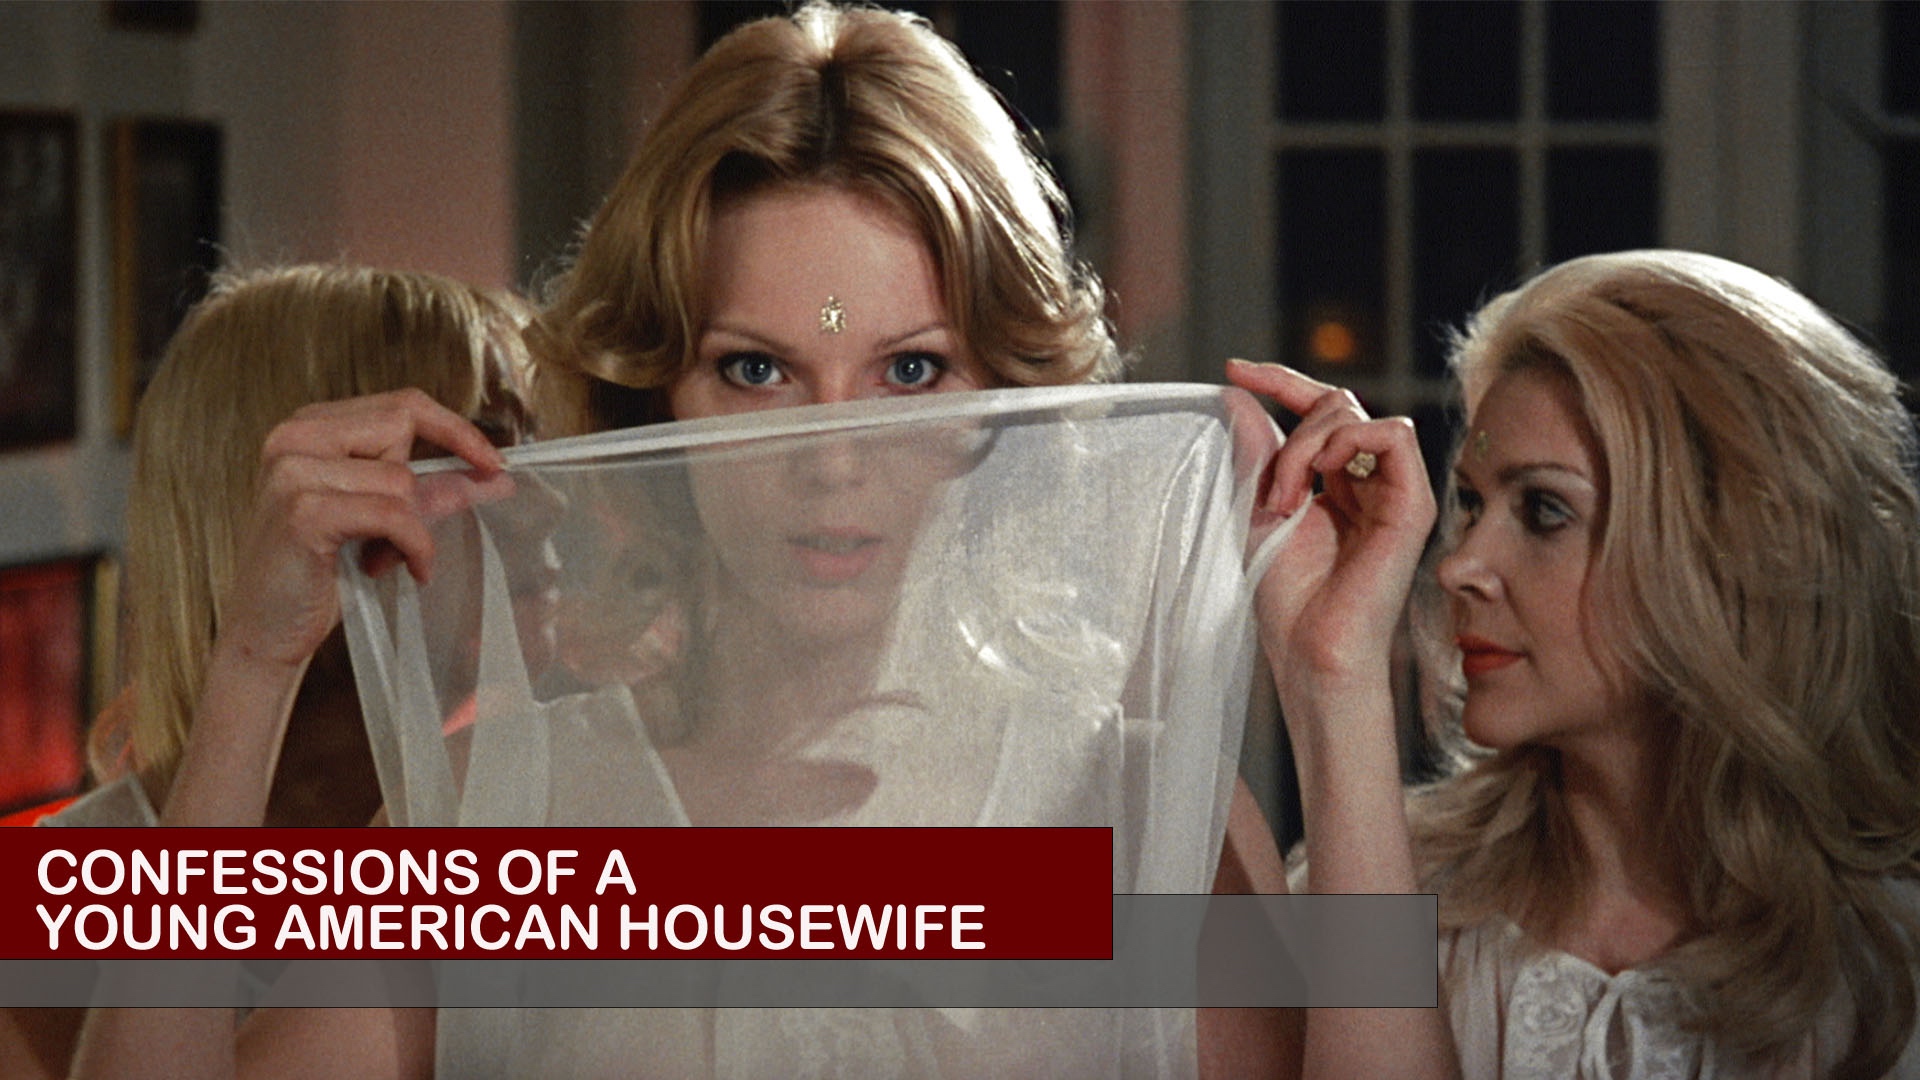 Confessions of a young american housewife movie